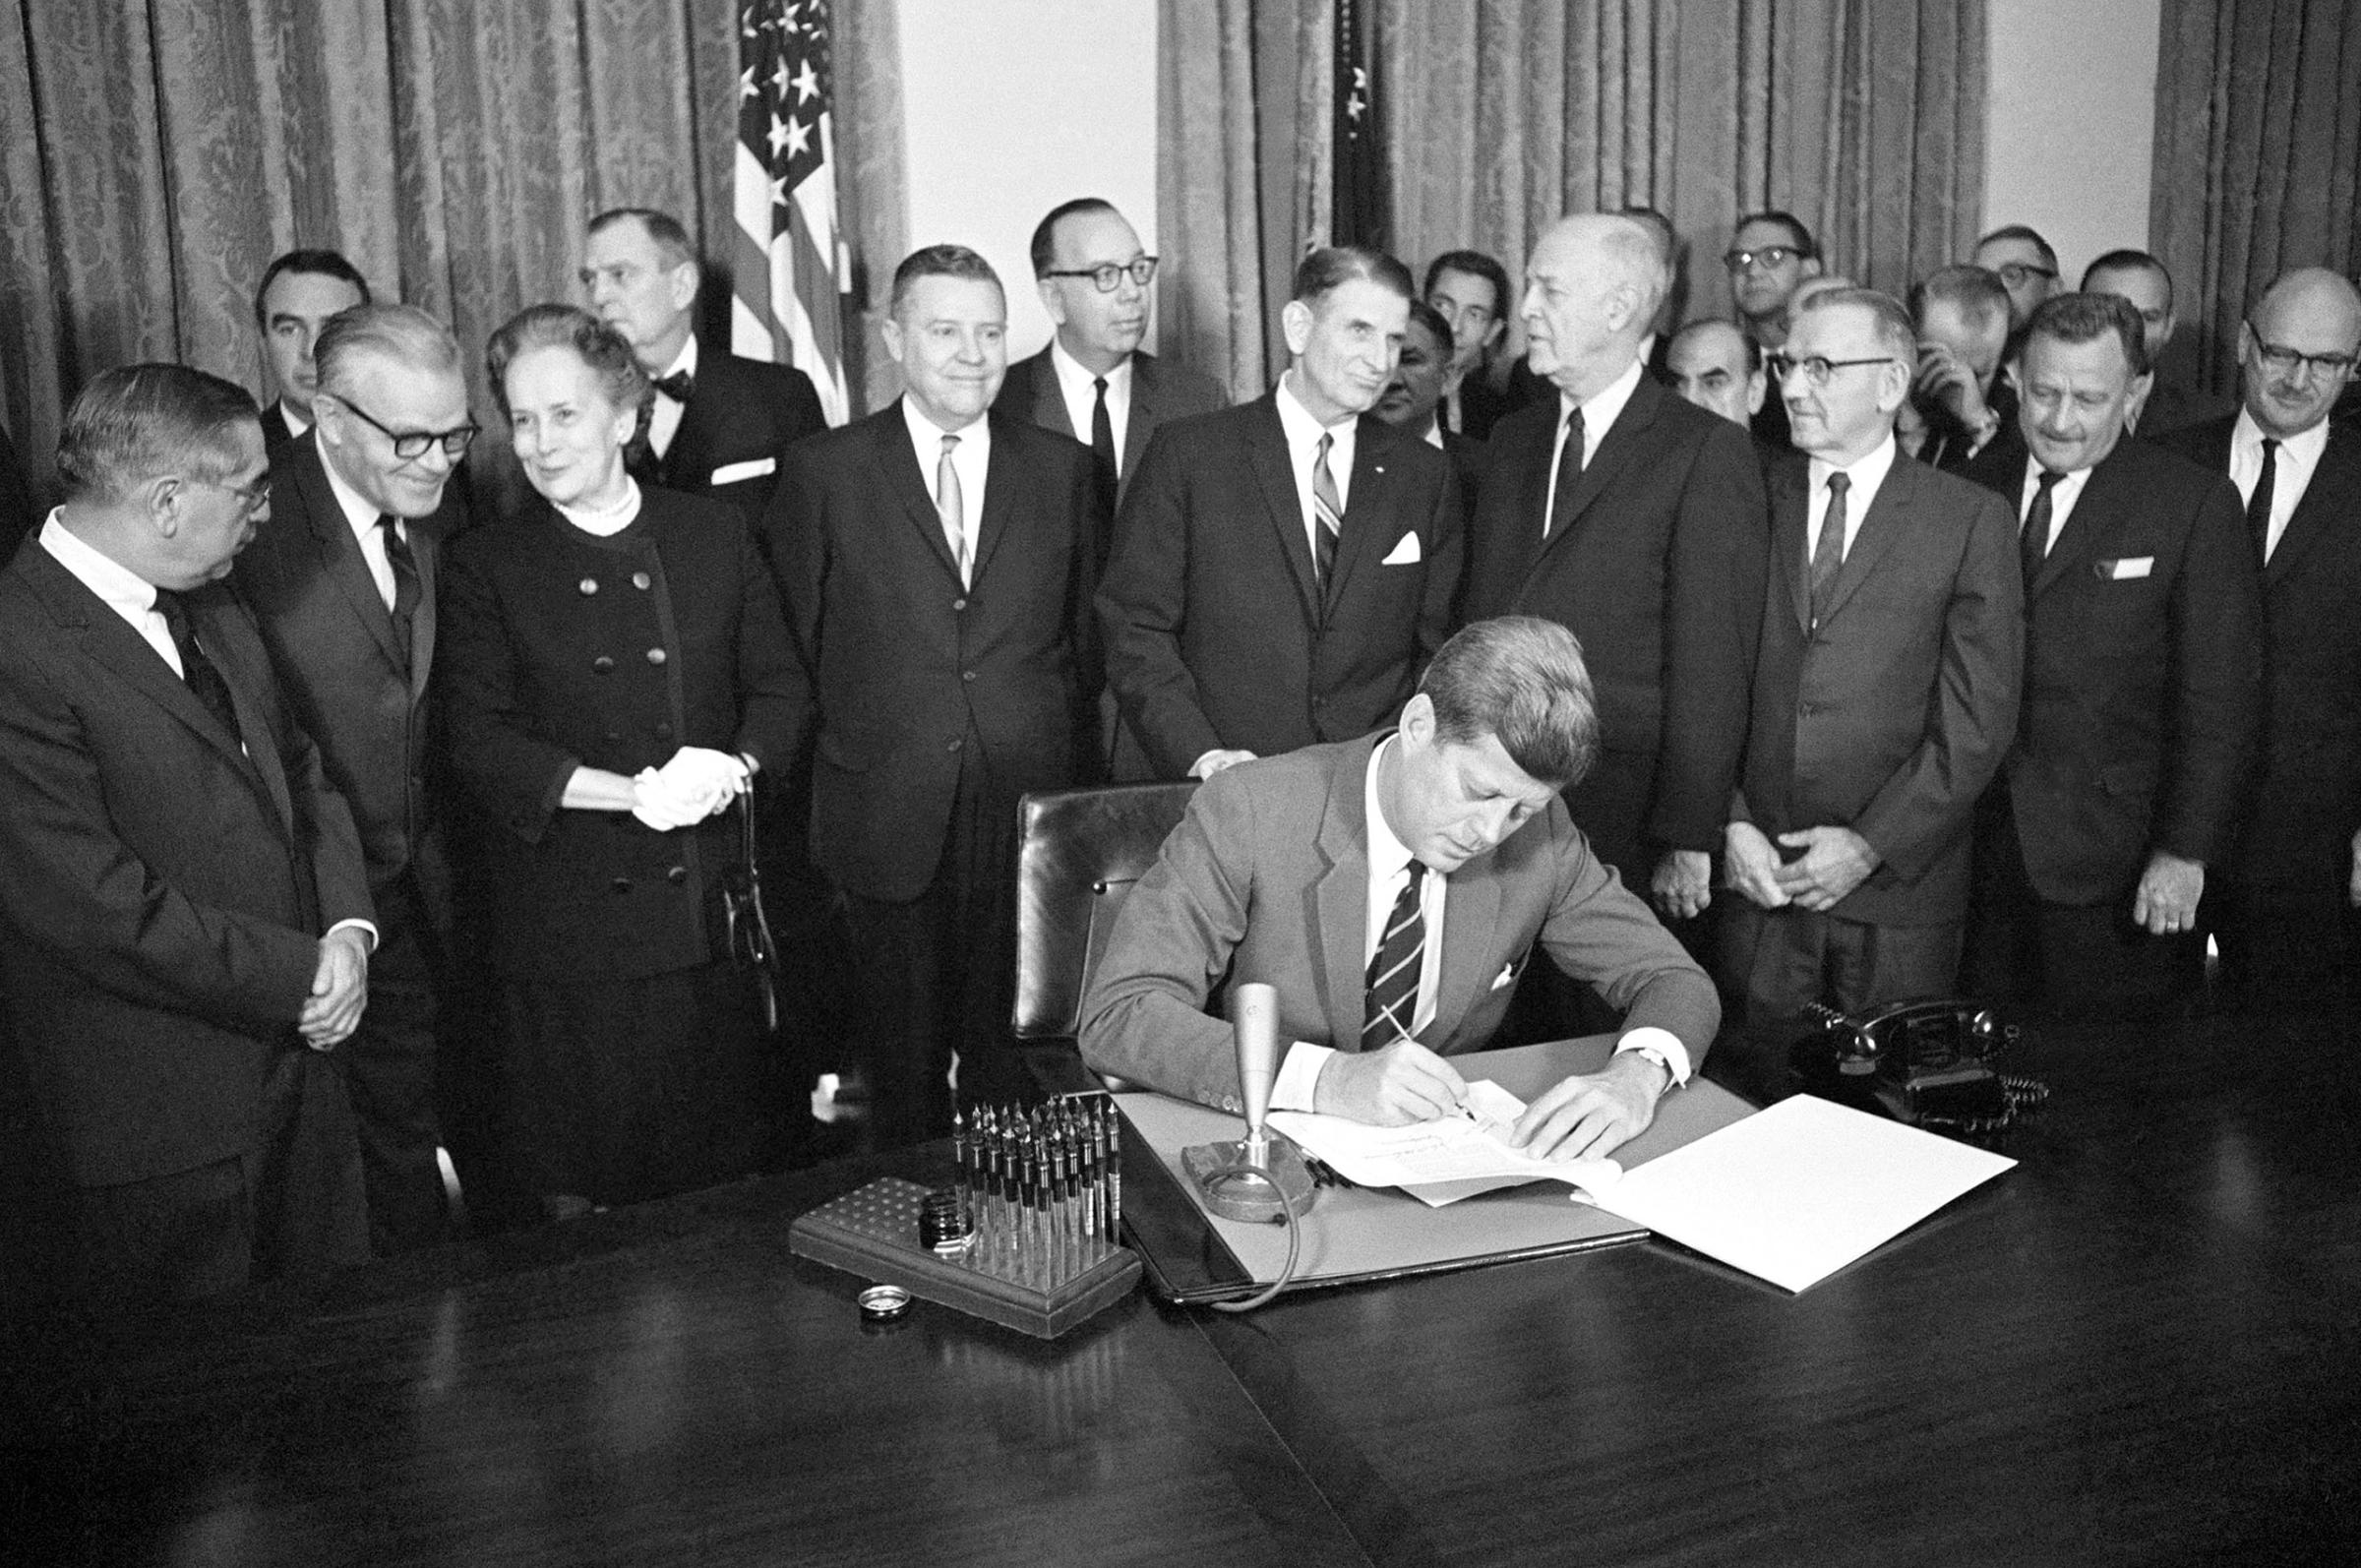 President John F. Kennedy signs a bill authorizing $329 million for mental health programs at the White House in Washington. October 31, 1963.